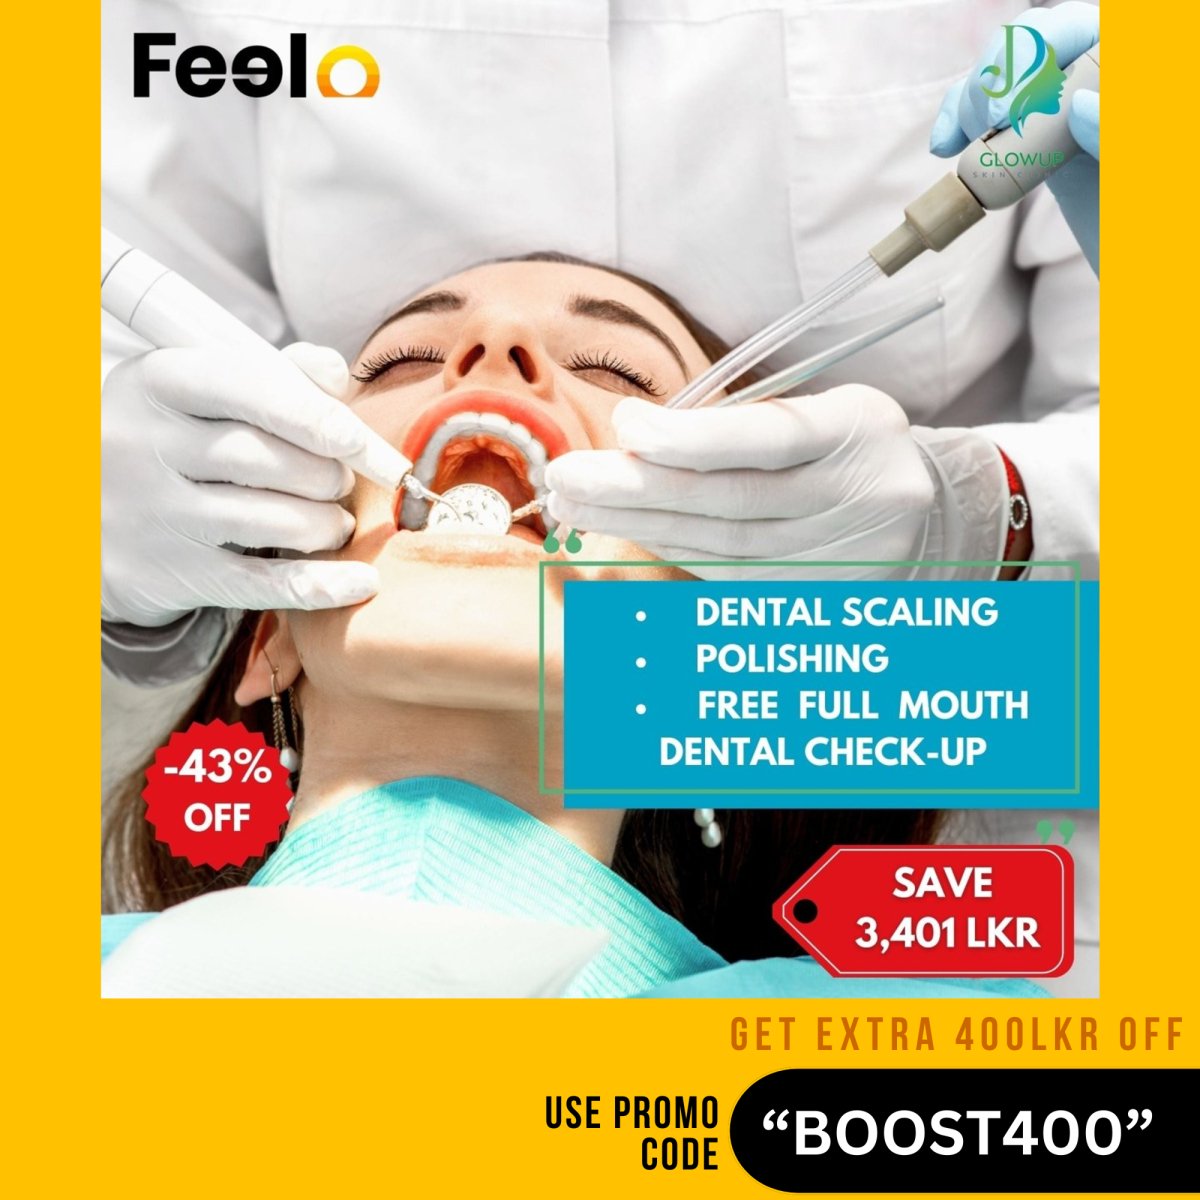 1x Professional Dental scaling + Polishing + Free Full Dental Check-up with guided explanations - Glowup Skin and Dental Clinic, Maharagama | Feelo